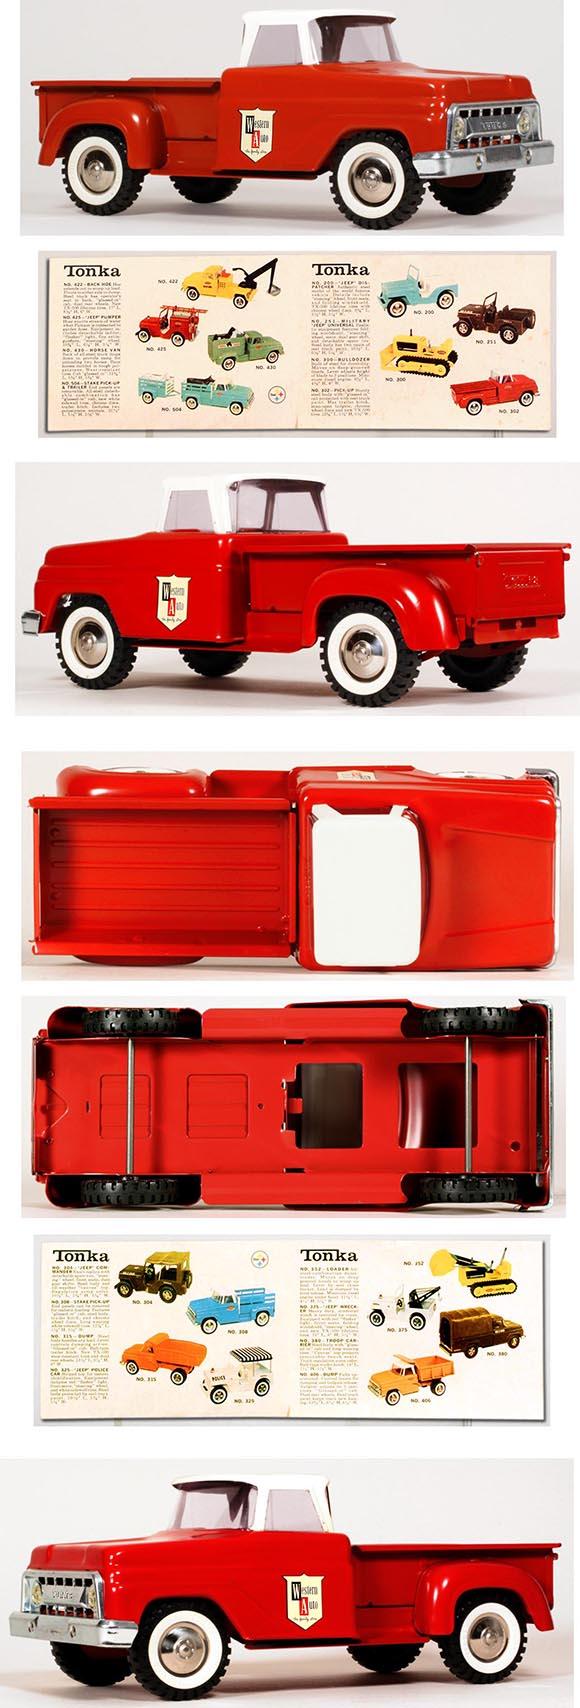 1965 Tonka, Western Auto Pick-Up Truck with Original Look Book